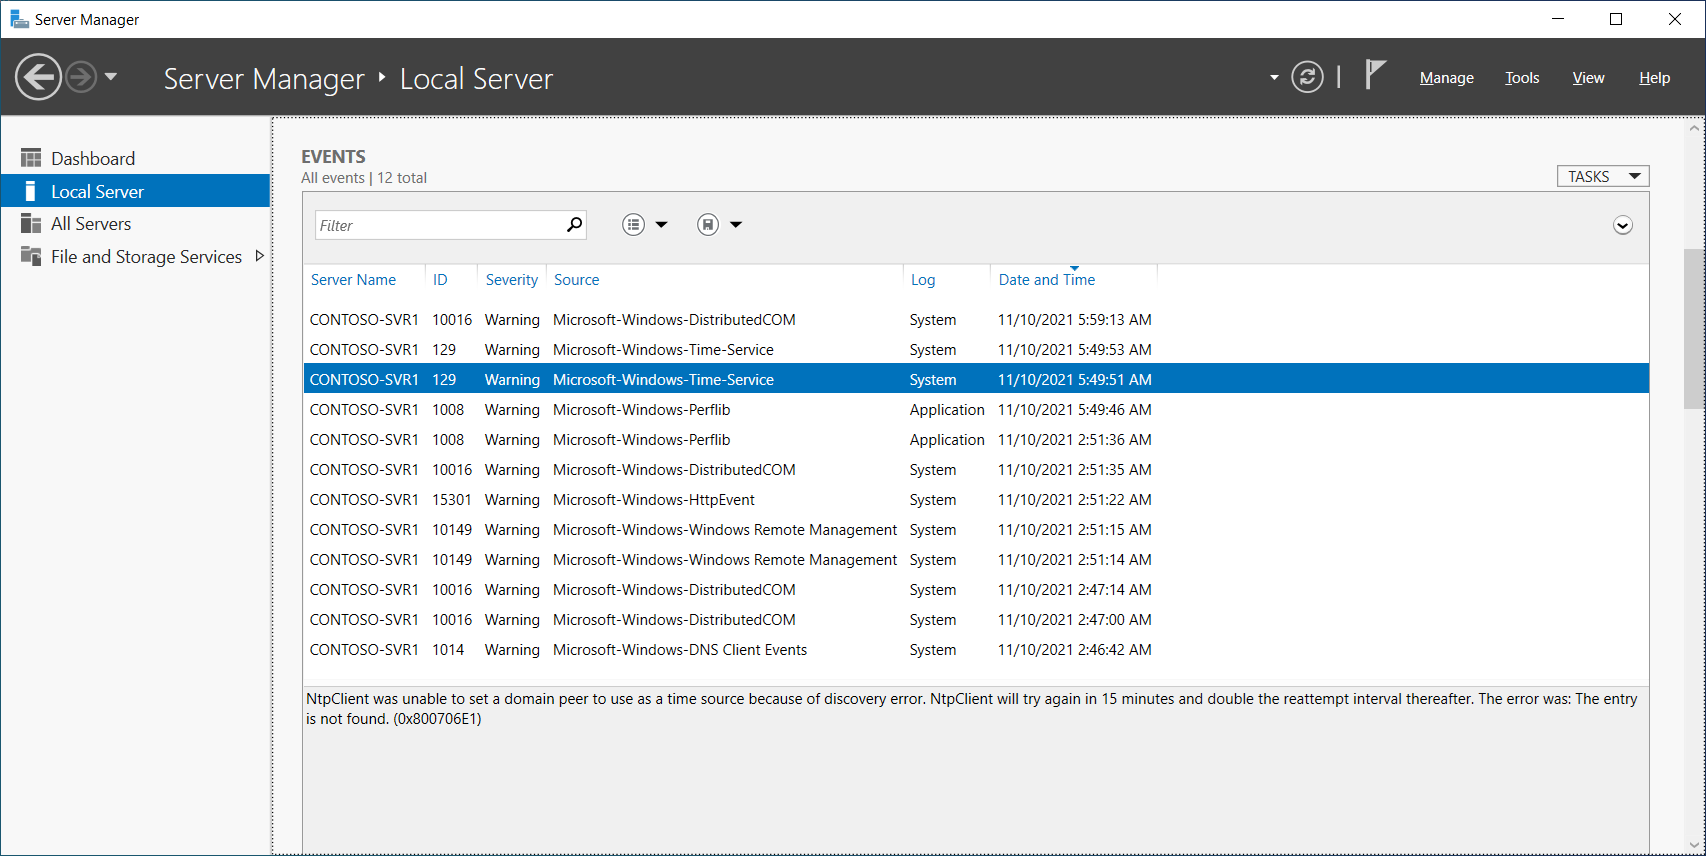 This screenshot displays the EVENTS node in Local Server in Server Manager. A Warning event has been selected that relates to the Microsoft-Windows-Time-Service.